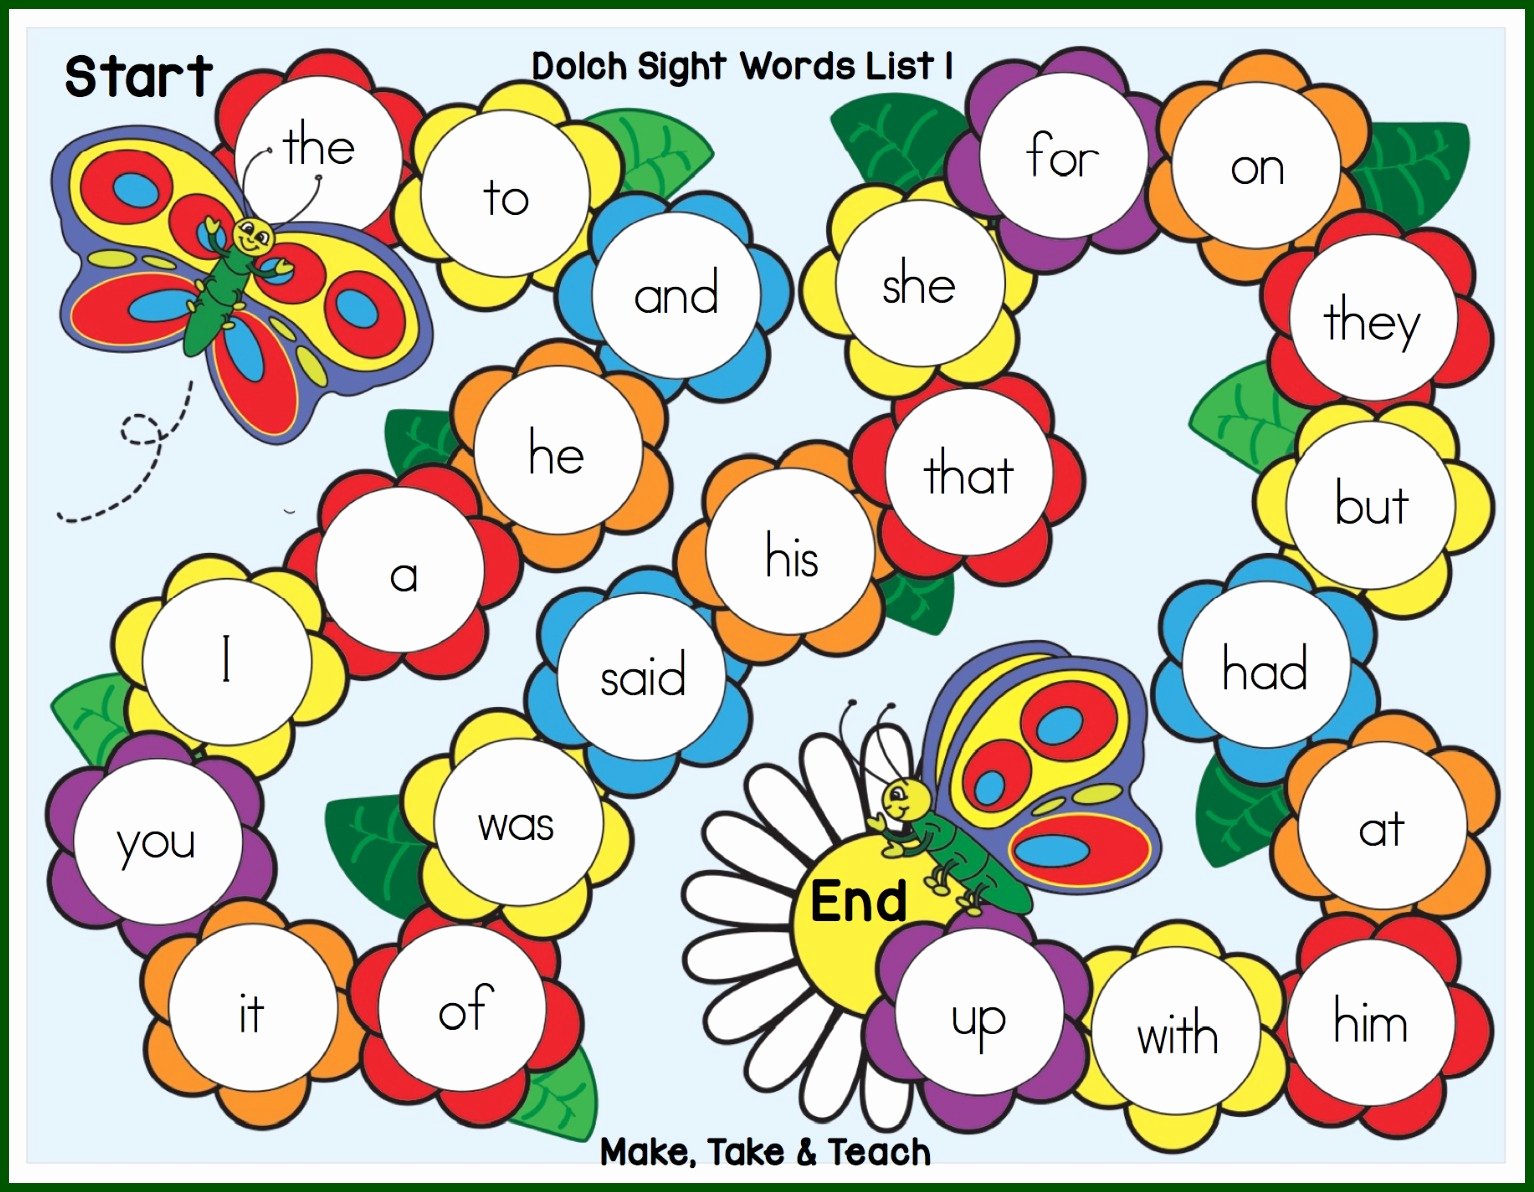 Game Templates for Teachers Awesome Spring themed Sight Word Game Boards Make Take &amp; Teach